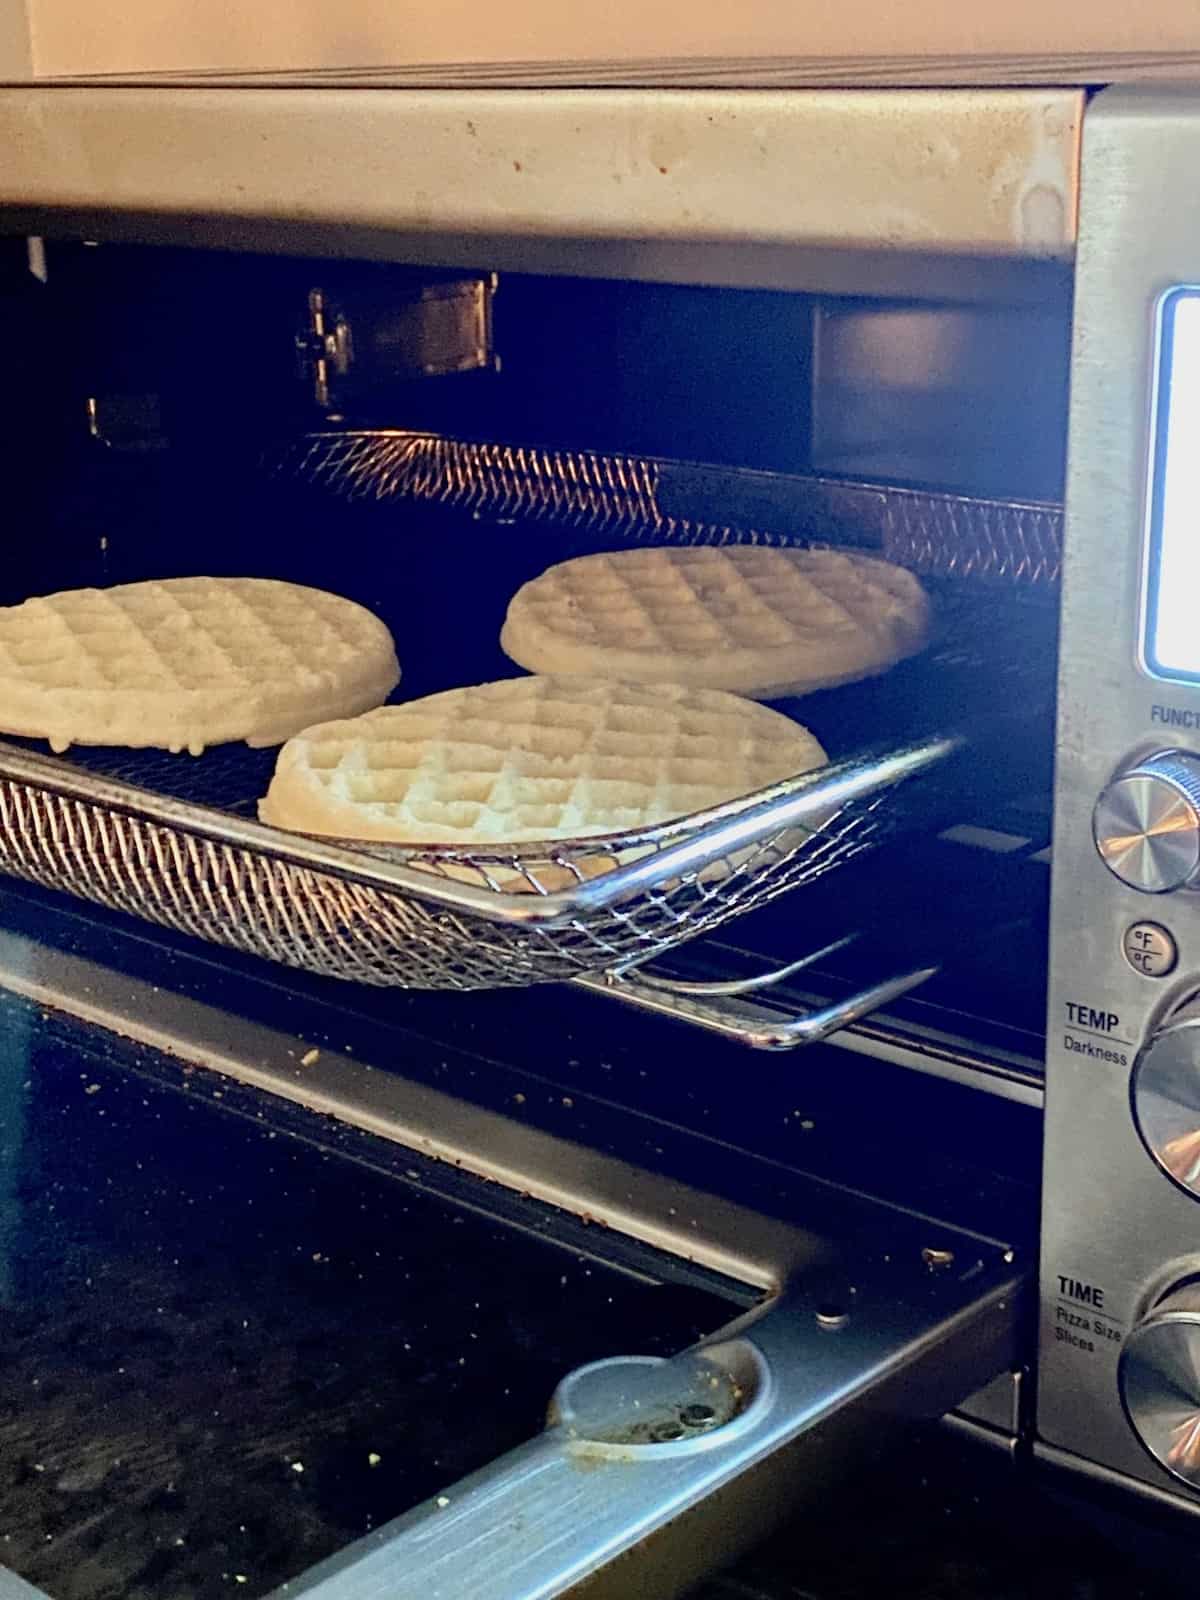 frozen waffles places on the air fryer tray